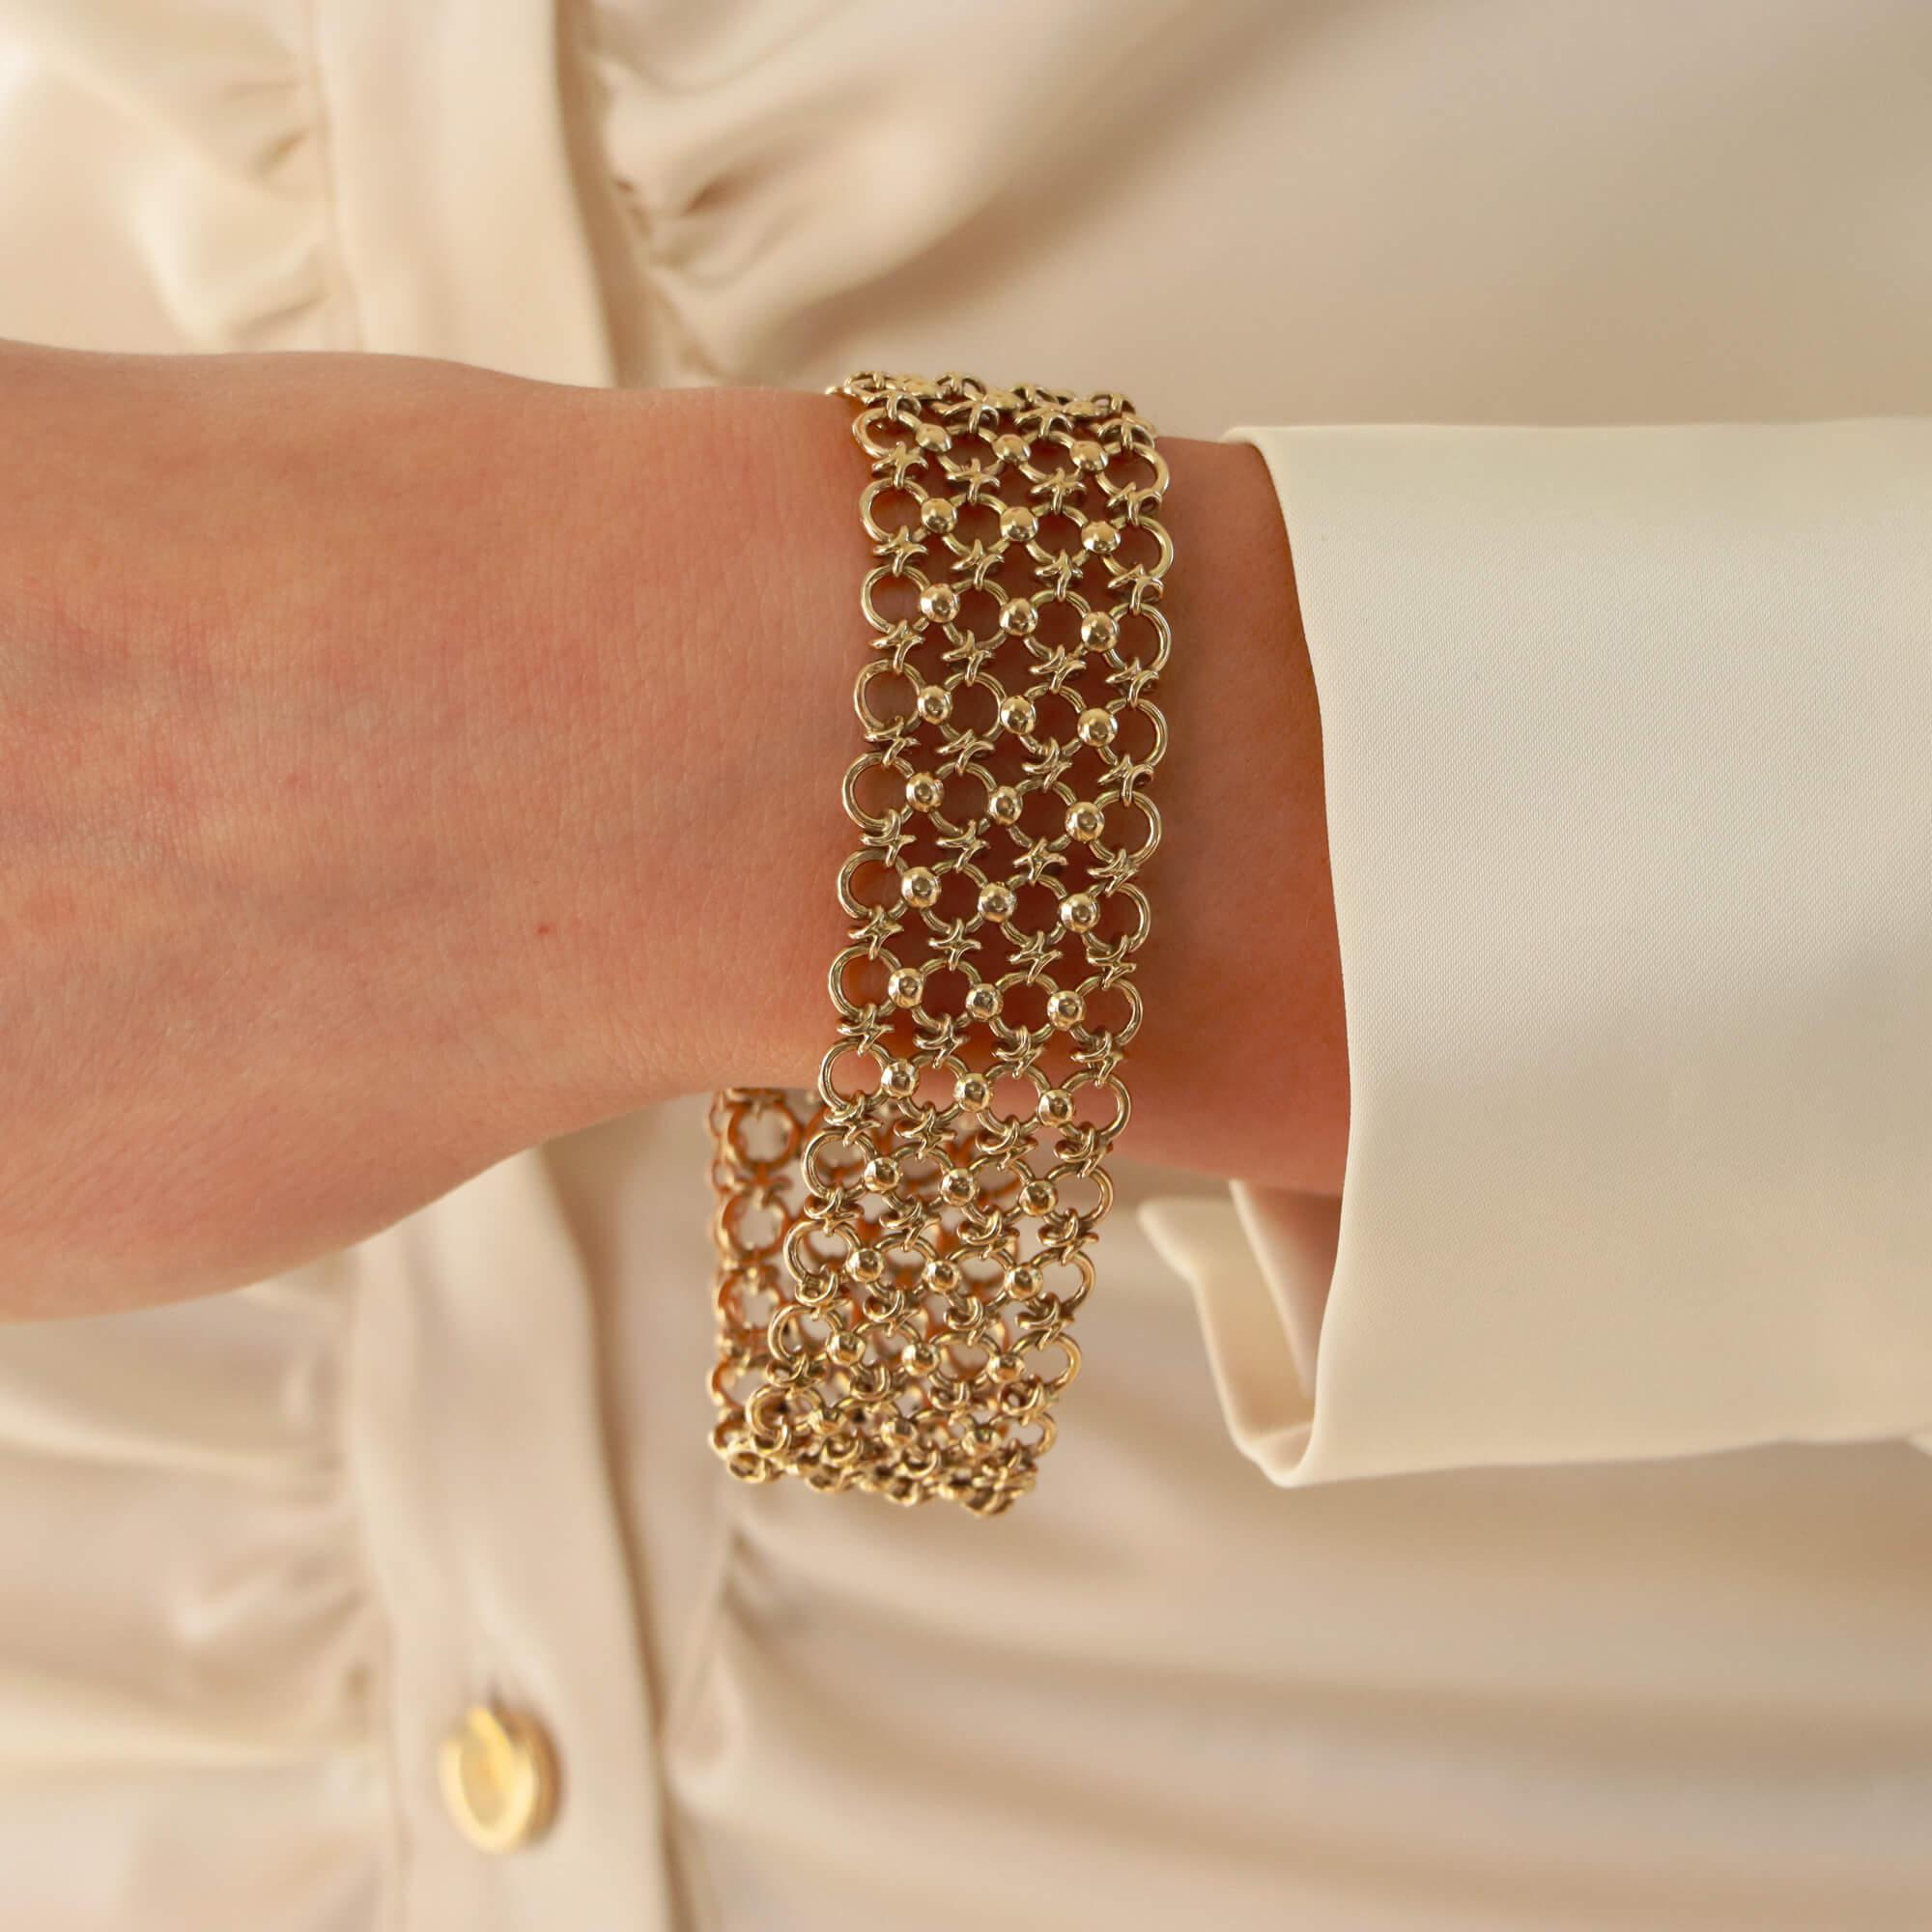 A beautiful vintage openwork bracelet set in 9k yellow gold.

The bracelet is composed of four rows of openwork gold which creates this beautiful looks once on the wrist! The bracelet is secured to reverse with a tongue push clasp and an additional